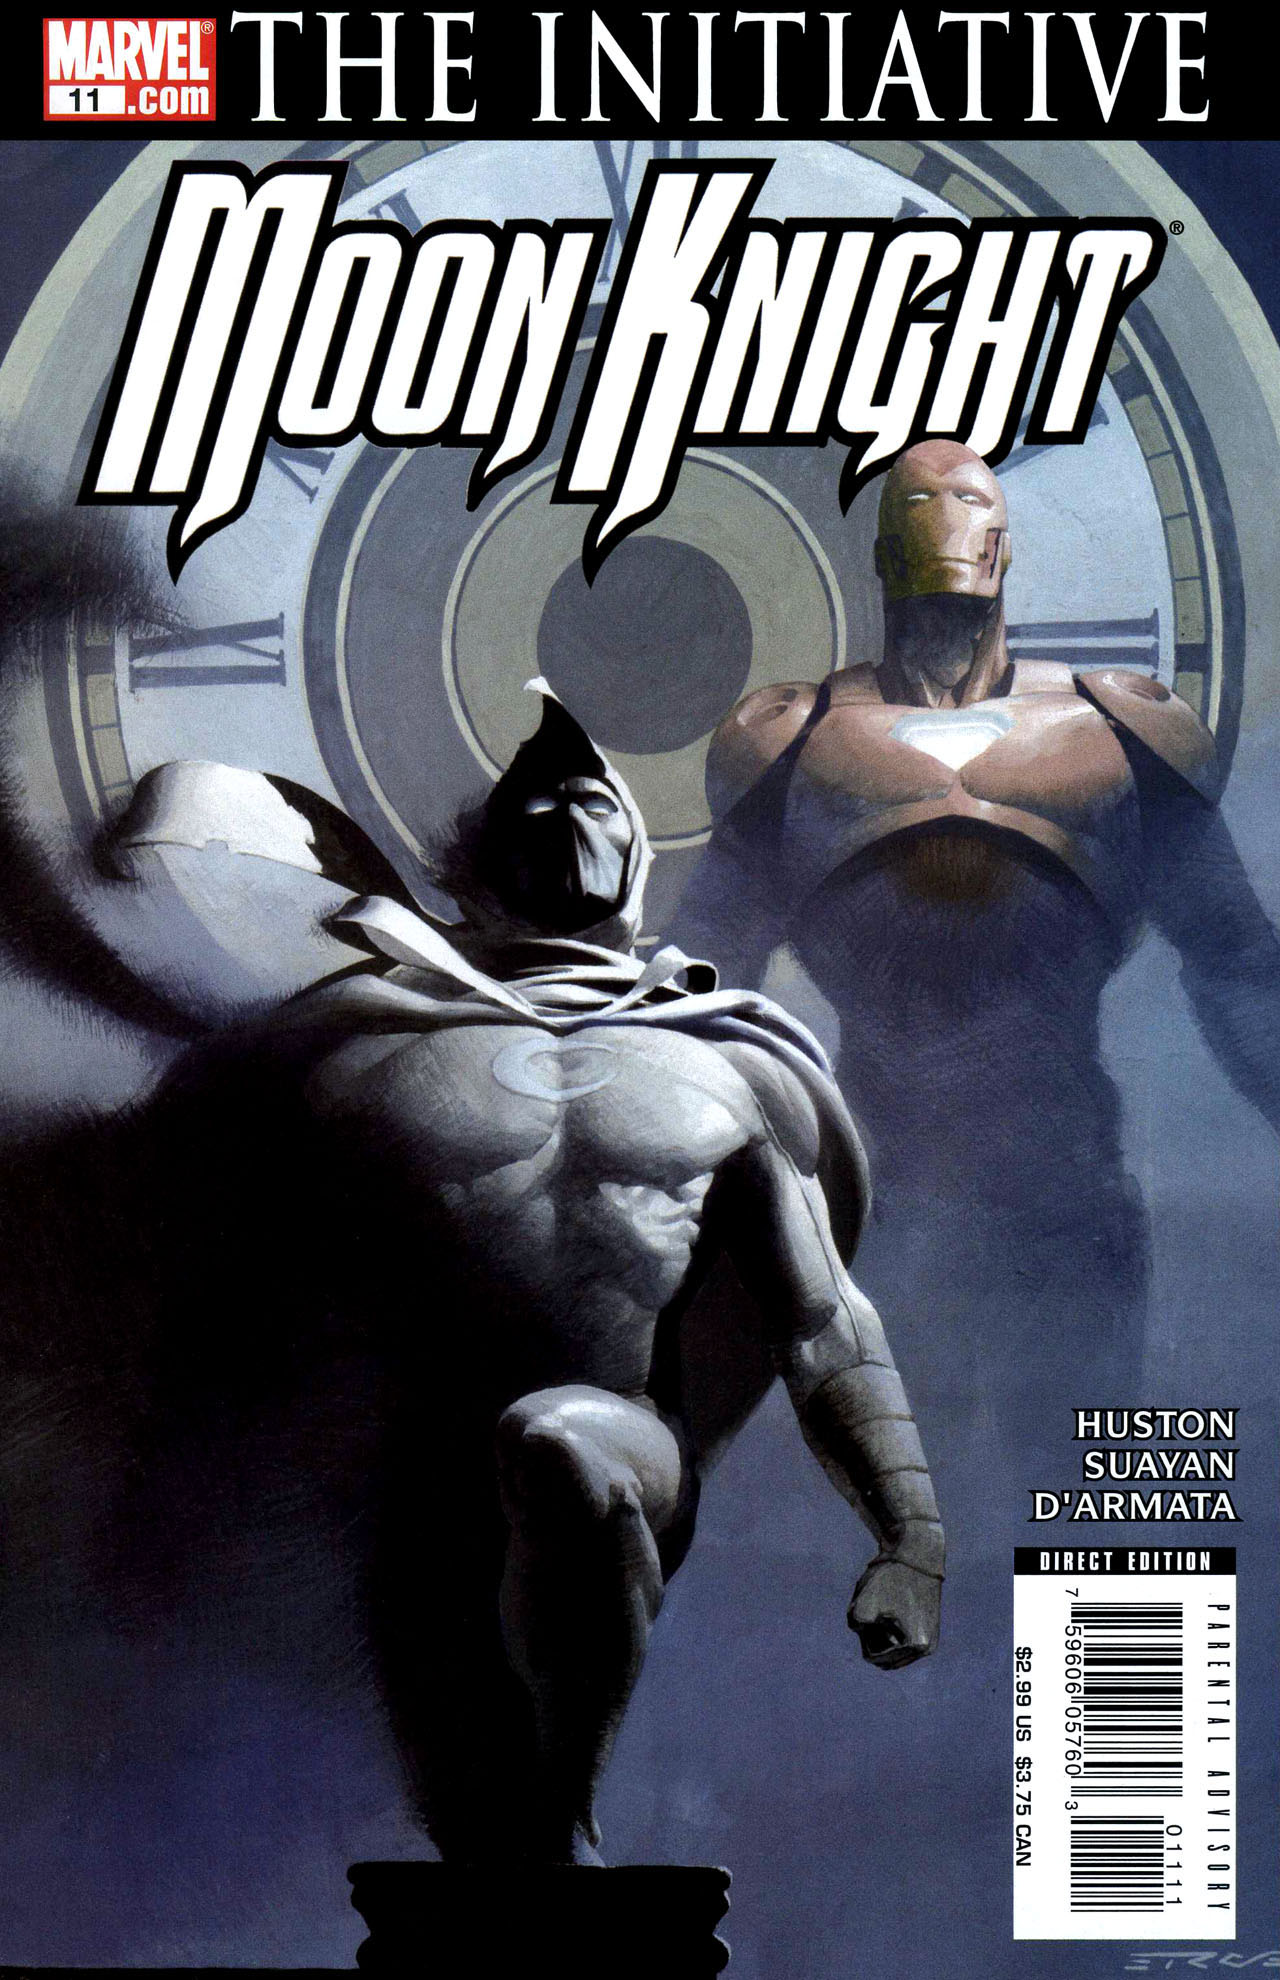  Moon Knight #11 - Midnight Sun, Chapter Five: One Son Lost